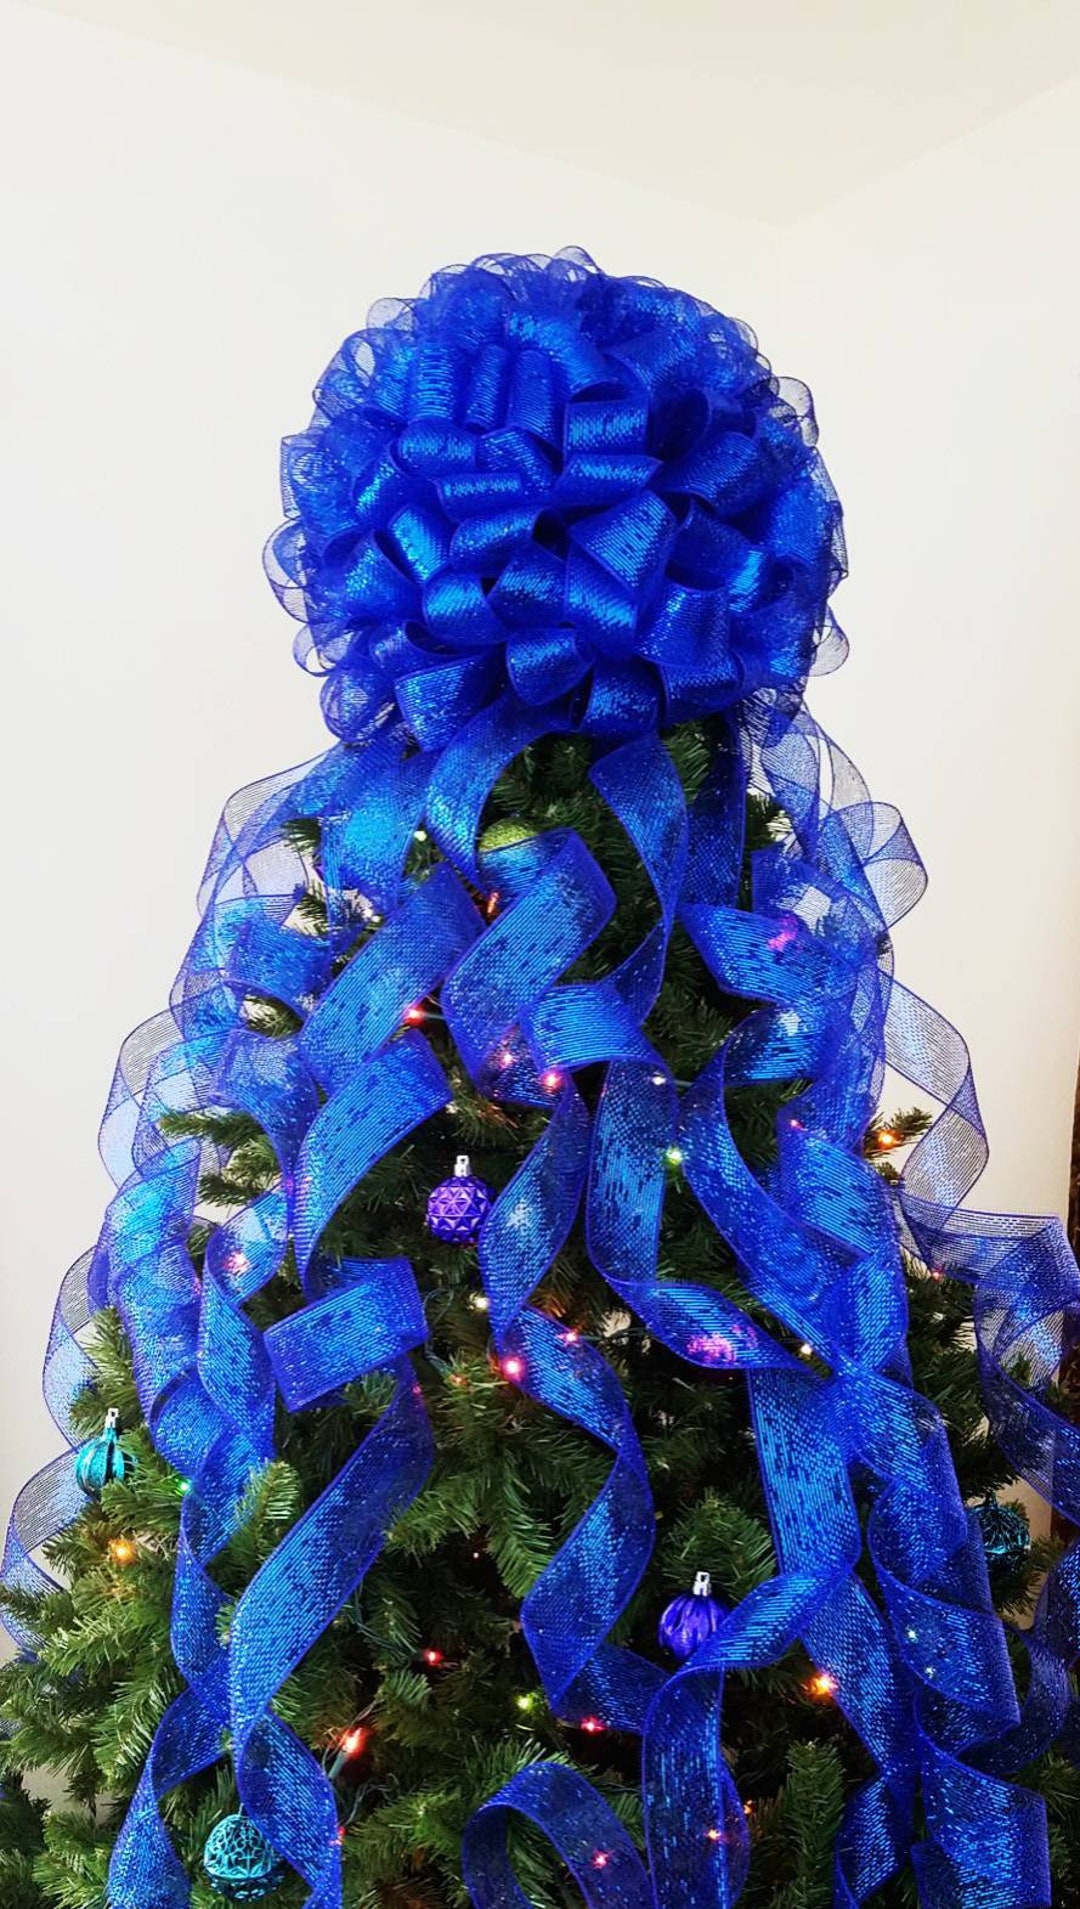 Larryhot Royal Blue Boas for Party - 80g 2yards Feather Boas for Christmas Tree,Concert,Wedding and Home Decoration (80g - Royal Blue)